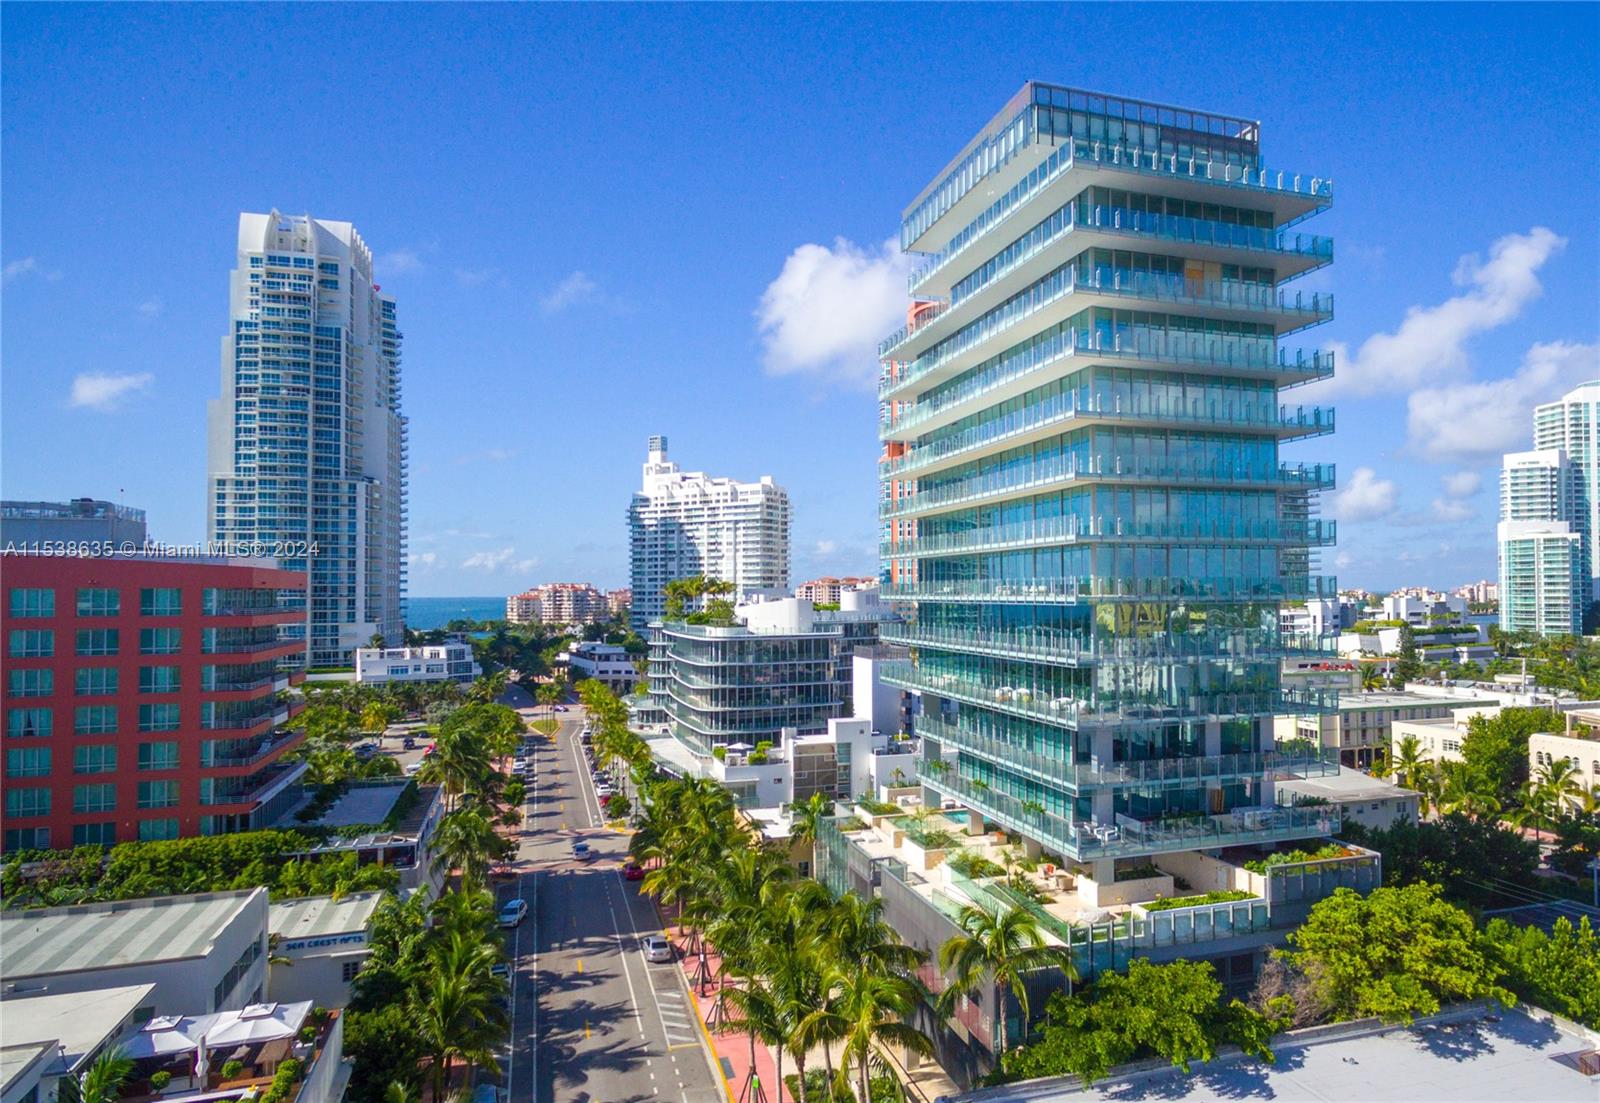 With only 10 full floor residences, GLASS at 120 OCEAN DR is true exclusive luxury living. Your own private estate manager provides single family home like living with five star hotel amenities. Designed by Rene Gonzalez, GLASS is truly one-of-a kind offering 360 degree views from each residence. This spacious 2 Bed, 2.5 Bath masterpiece has a total of 3,946 square foot of space of indoor/outdoor living. Residence features include an all Calcutta marble kitchen with Gaggenau and Sub-Zero appliances, oak wood floors with floating walls and master bedroom made of floor to ceiling Arrabescato marble. Full beach and concierge services included.